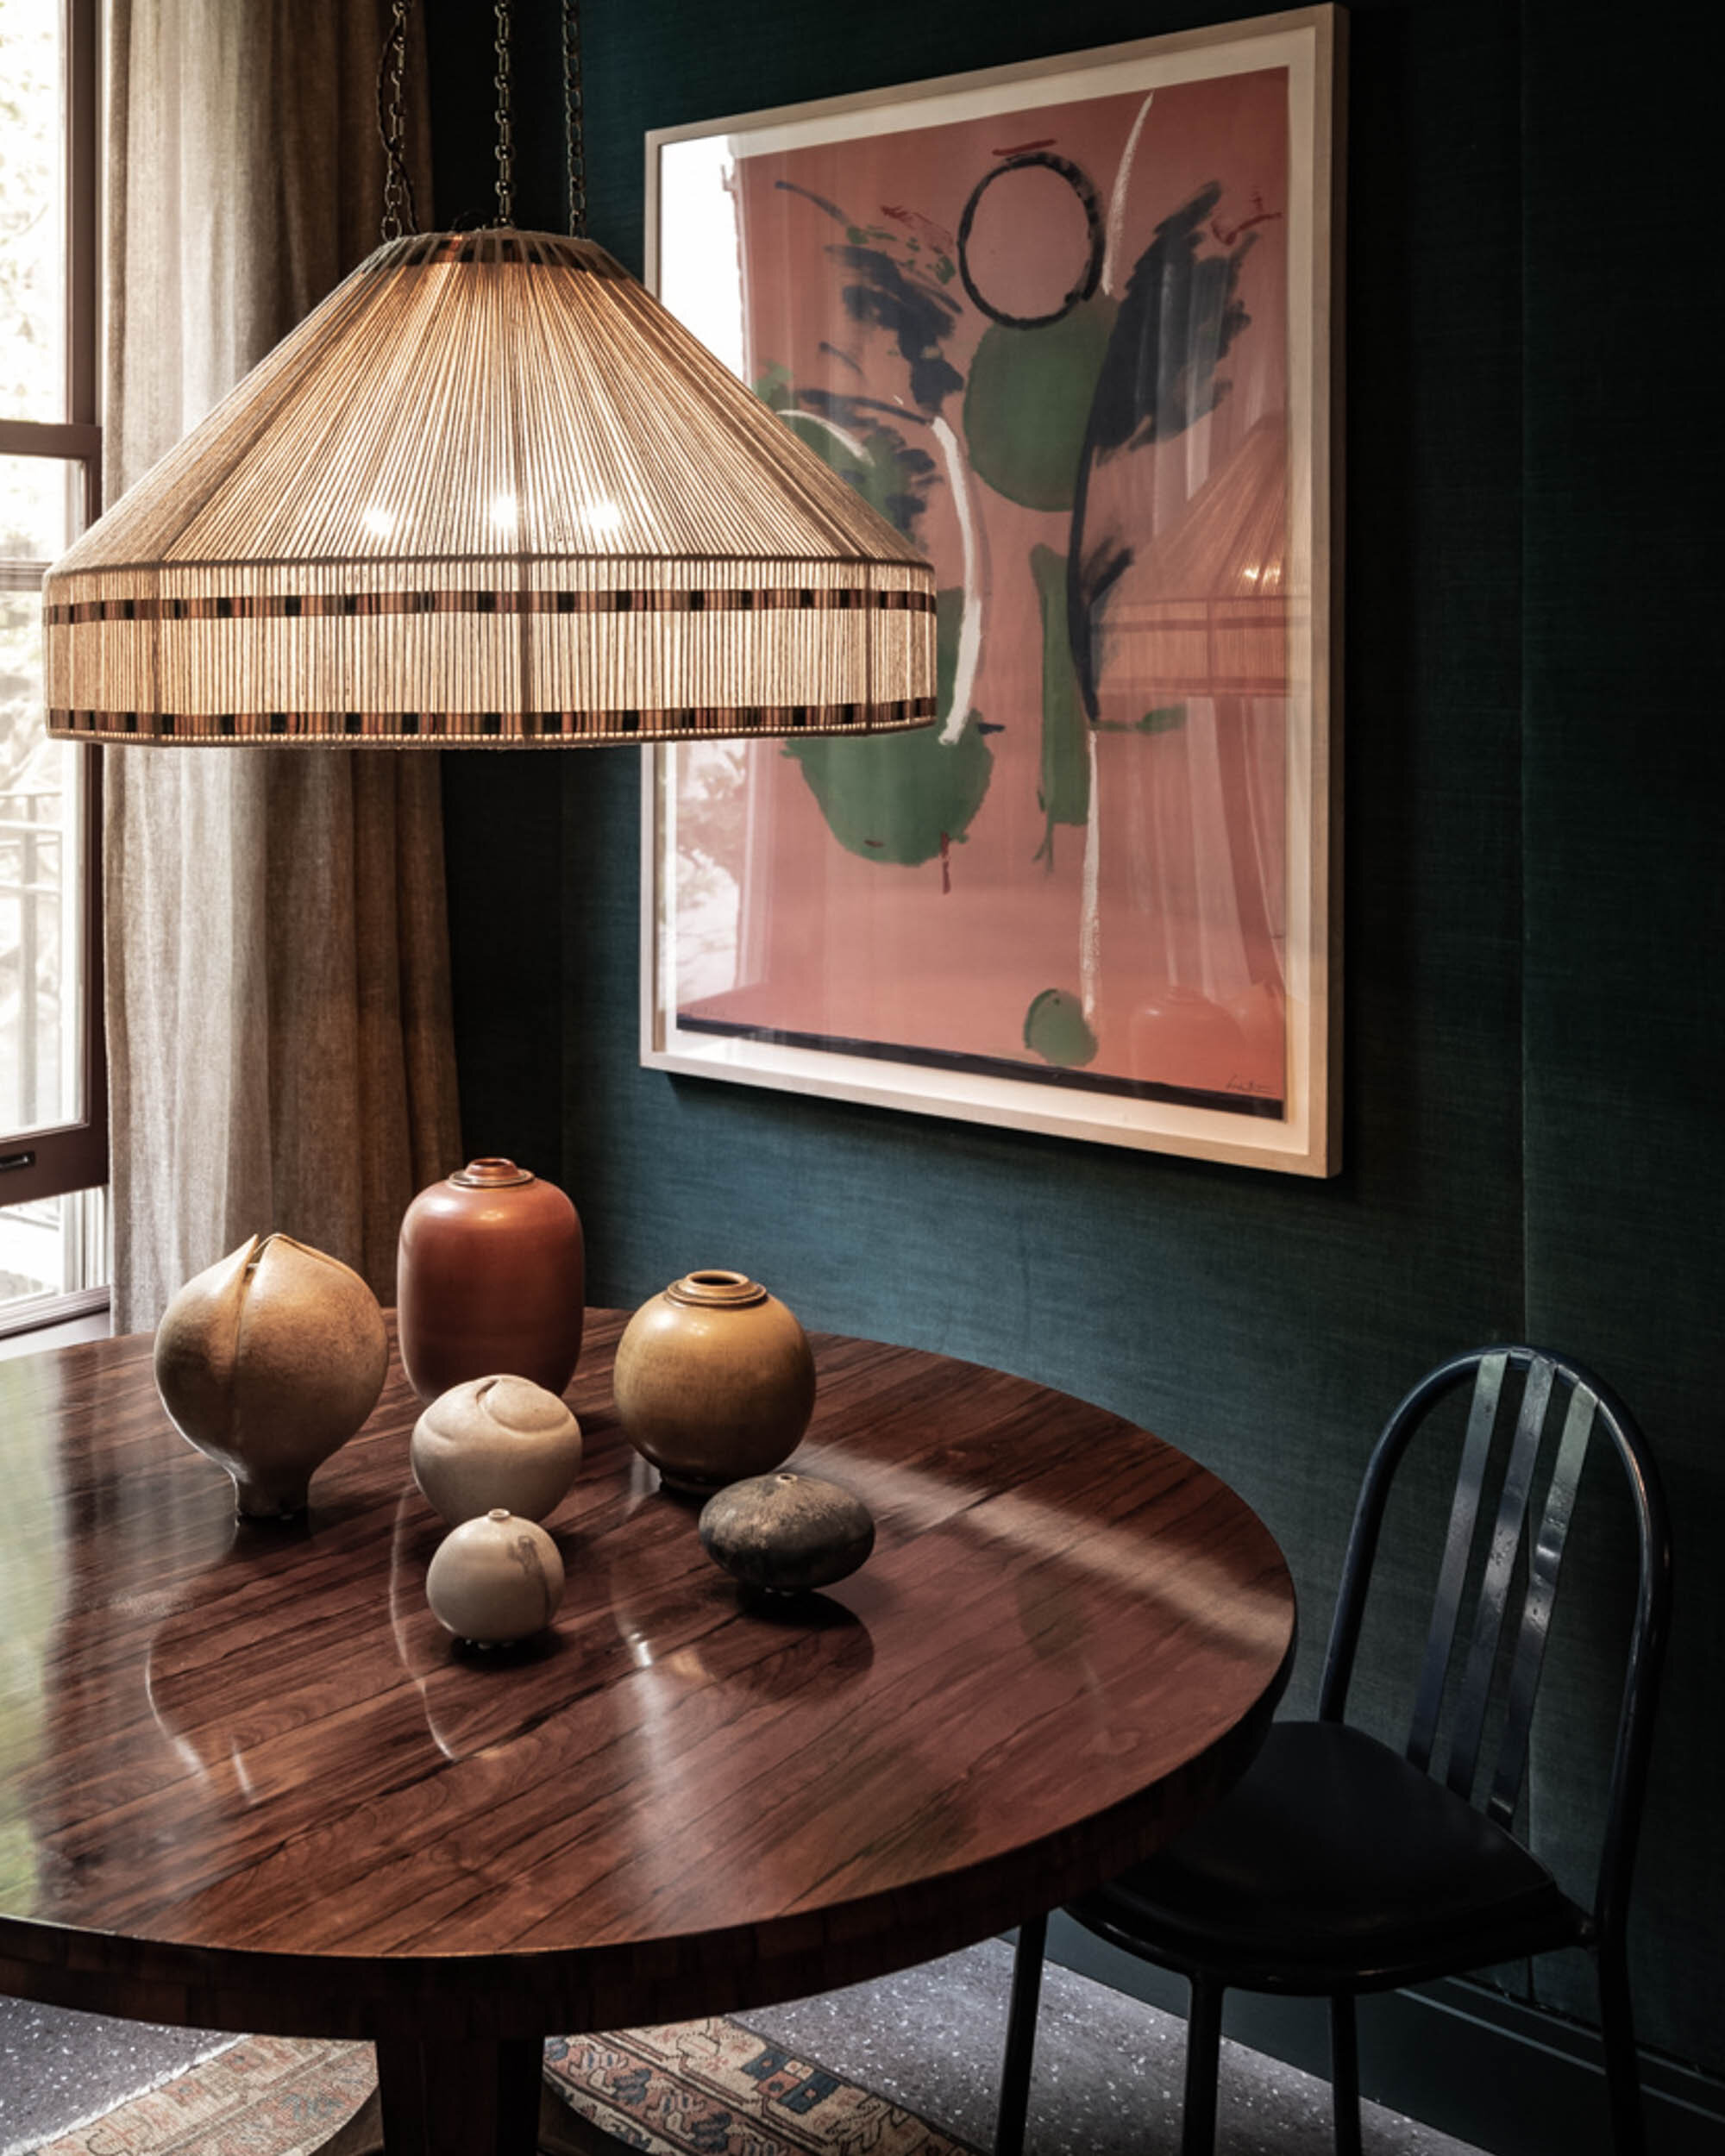  #bradsteinphoto, Highlights from the #kipsbayshowhouse19 Pappas Miron Design’s sitting room and bath, whose stylish furnishings and objects show off handcrafted materials and forms. Teal upholstery reaching not quite to the ceiling presents a vivid 